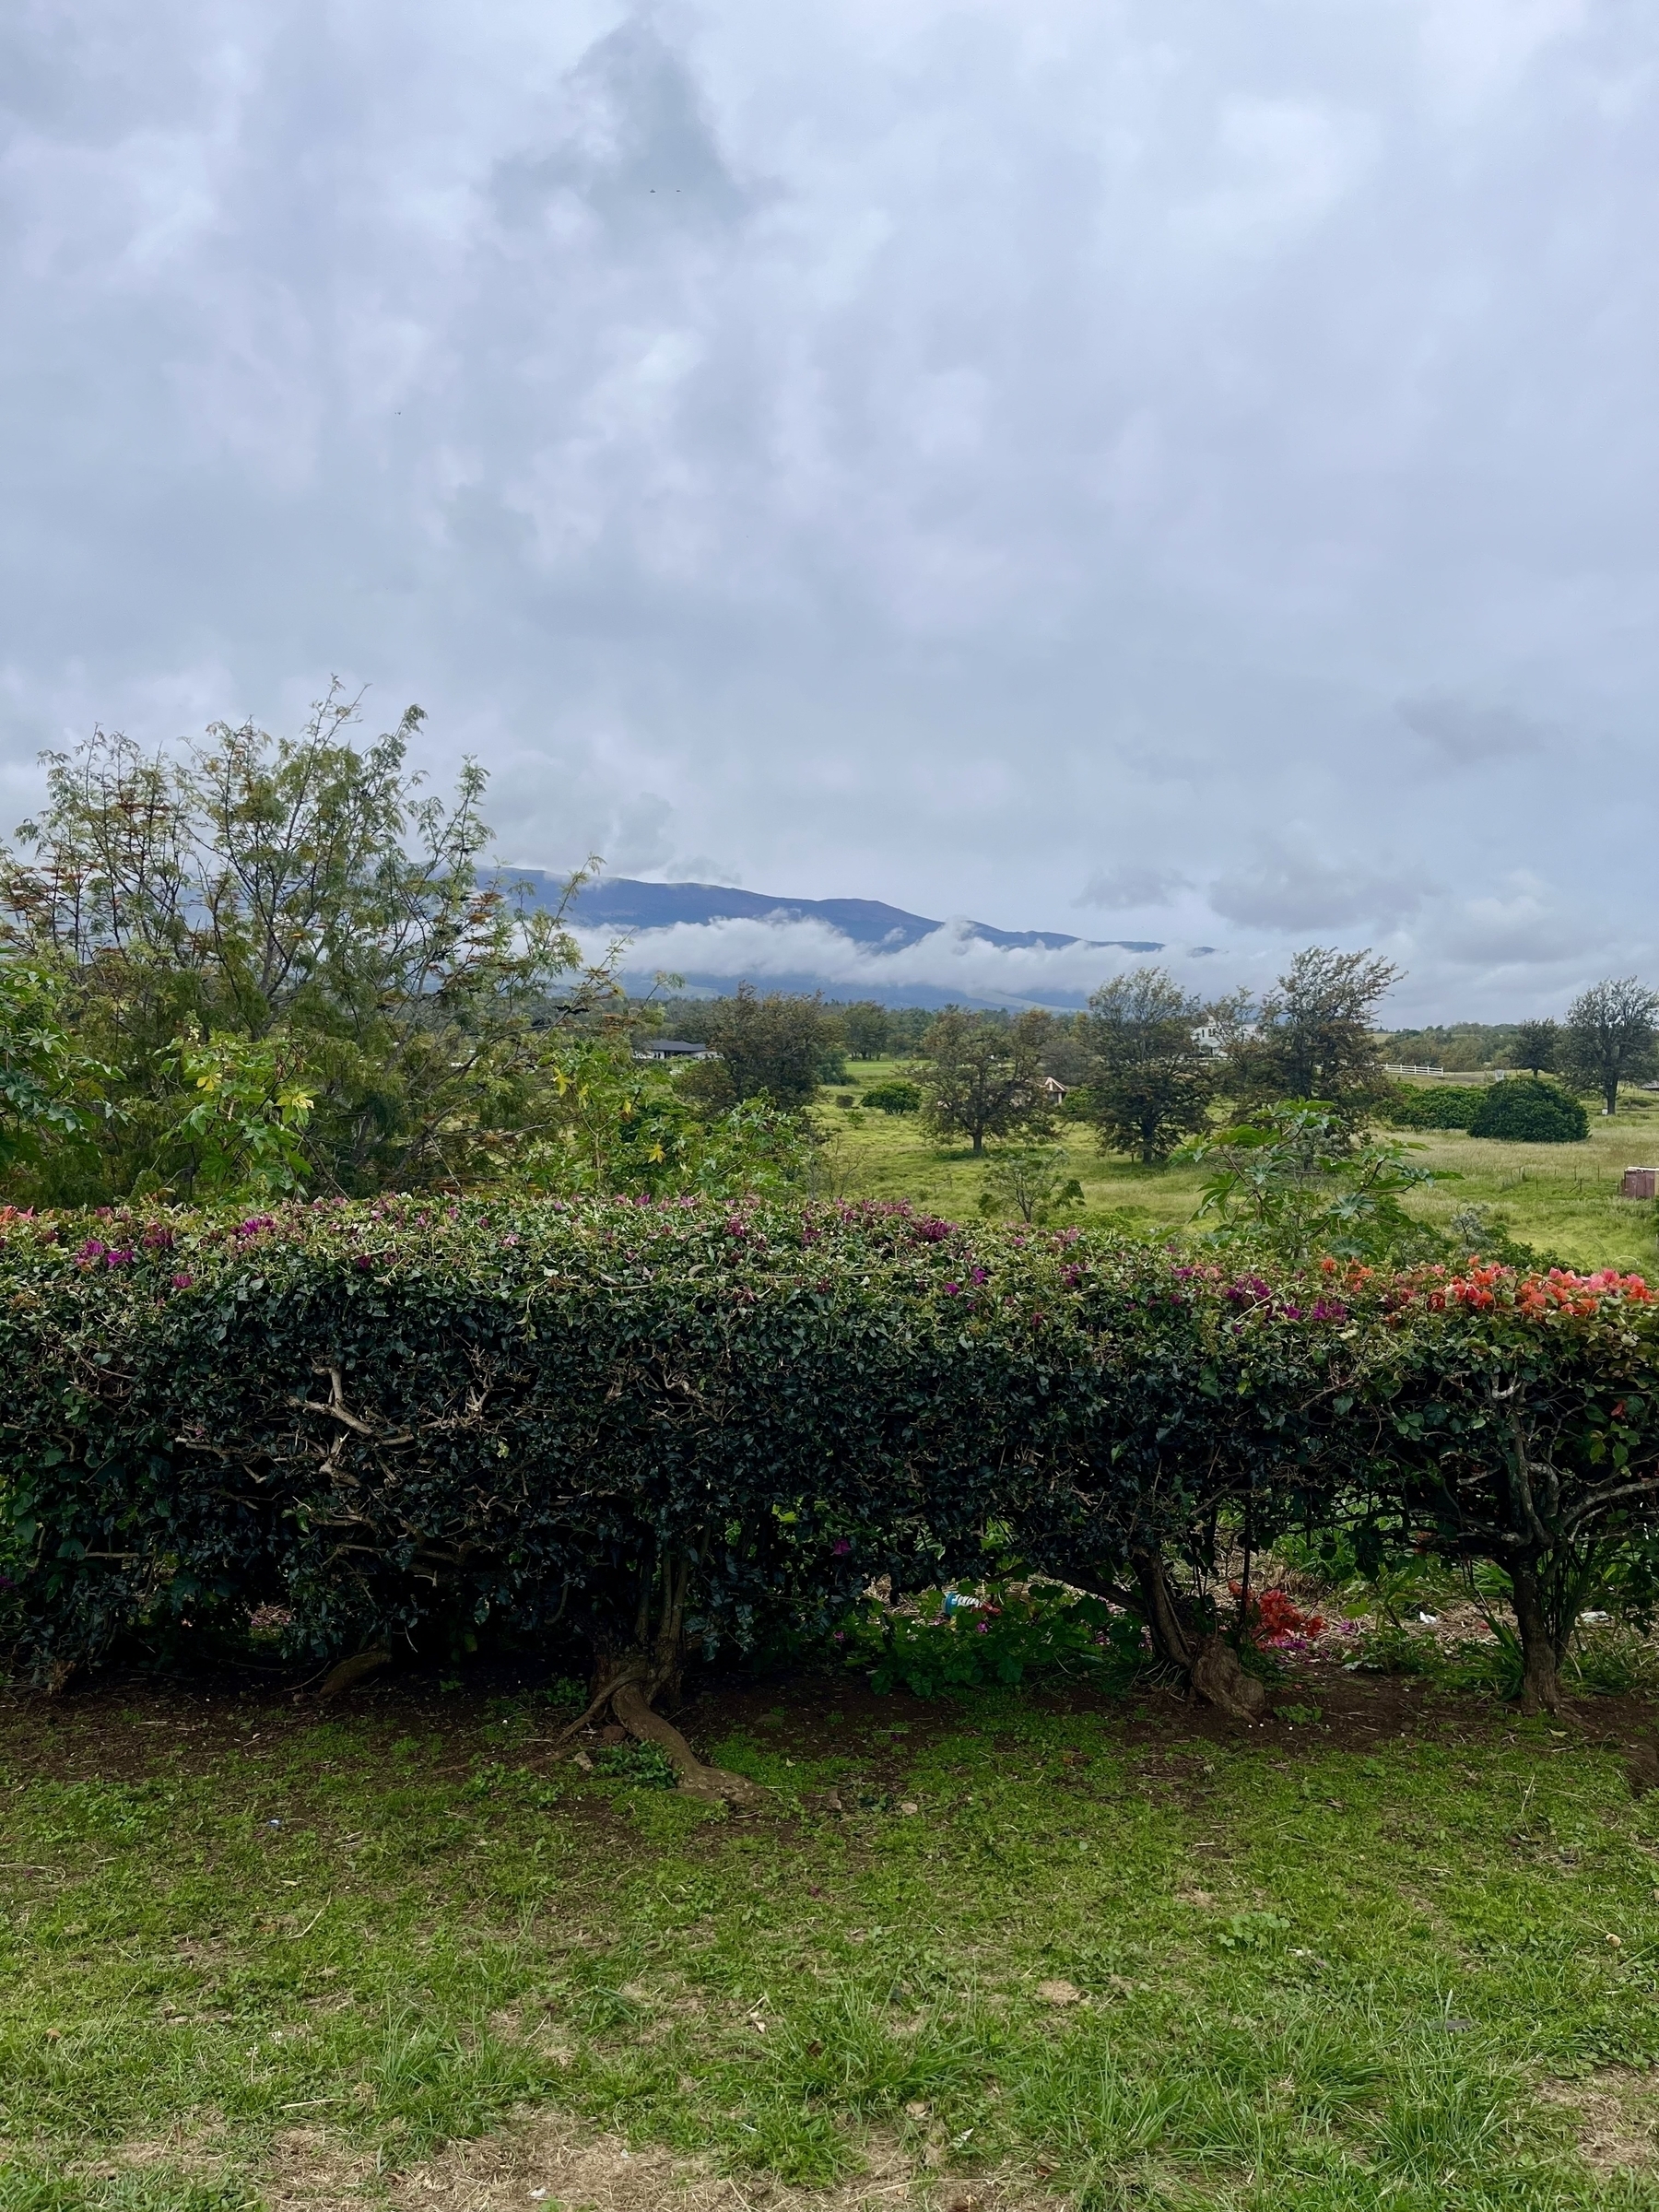 An overcast day with a broad mountain top visible above low clouds. Fields and trees extend to the middle distance. In the foreground is a hedge with some purple and red flowers in it.